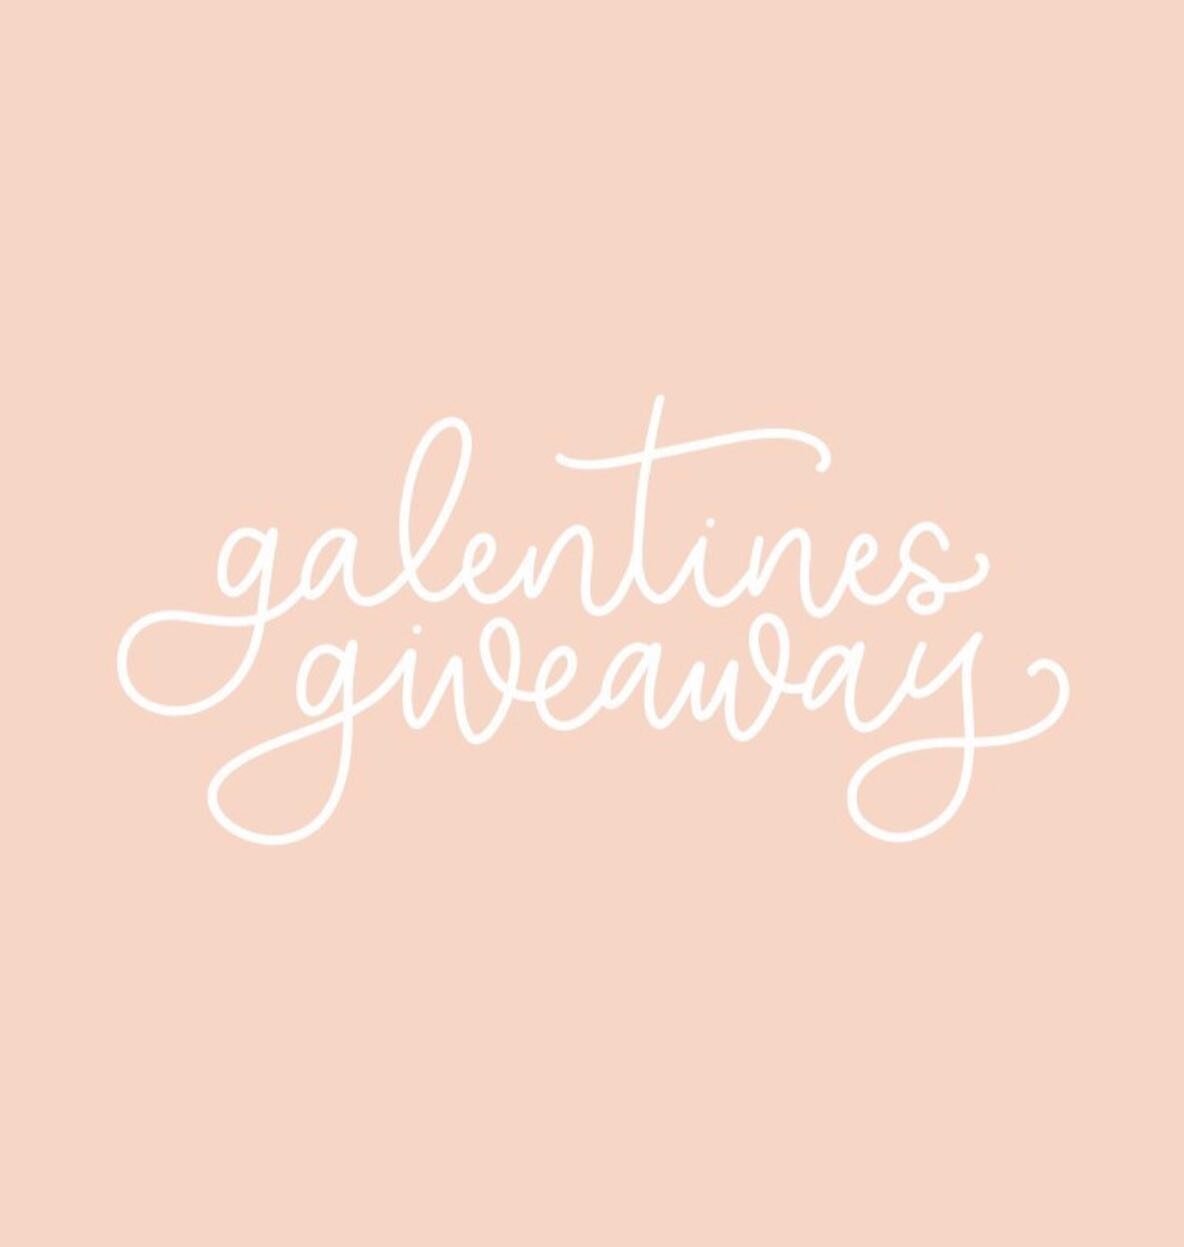 💕❤️💕GALENTINES GIVEAWAY! 💕❤️💕
&bull;
Galentines day is one of my favorite holidays! To celebrate I&rsquo;m giving away a 1.25&rdquo; Bio-Ionic rotating curling iron! No need to rotate the iron yourself- this hot tool does it for you 😍😍 if that&